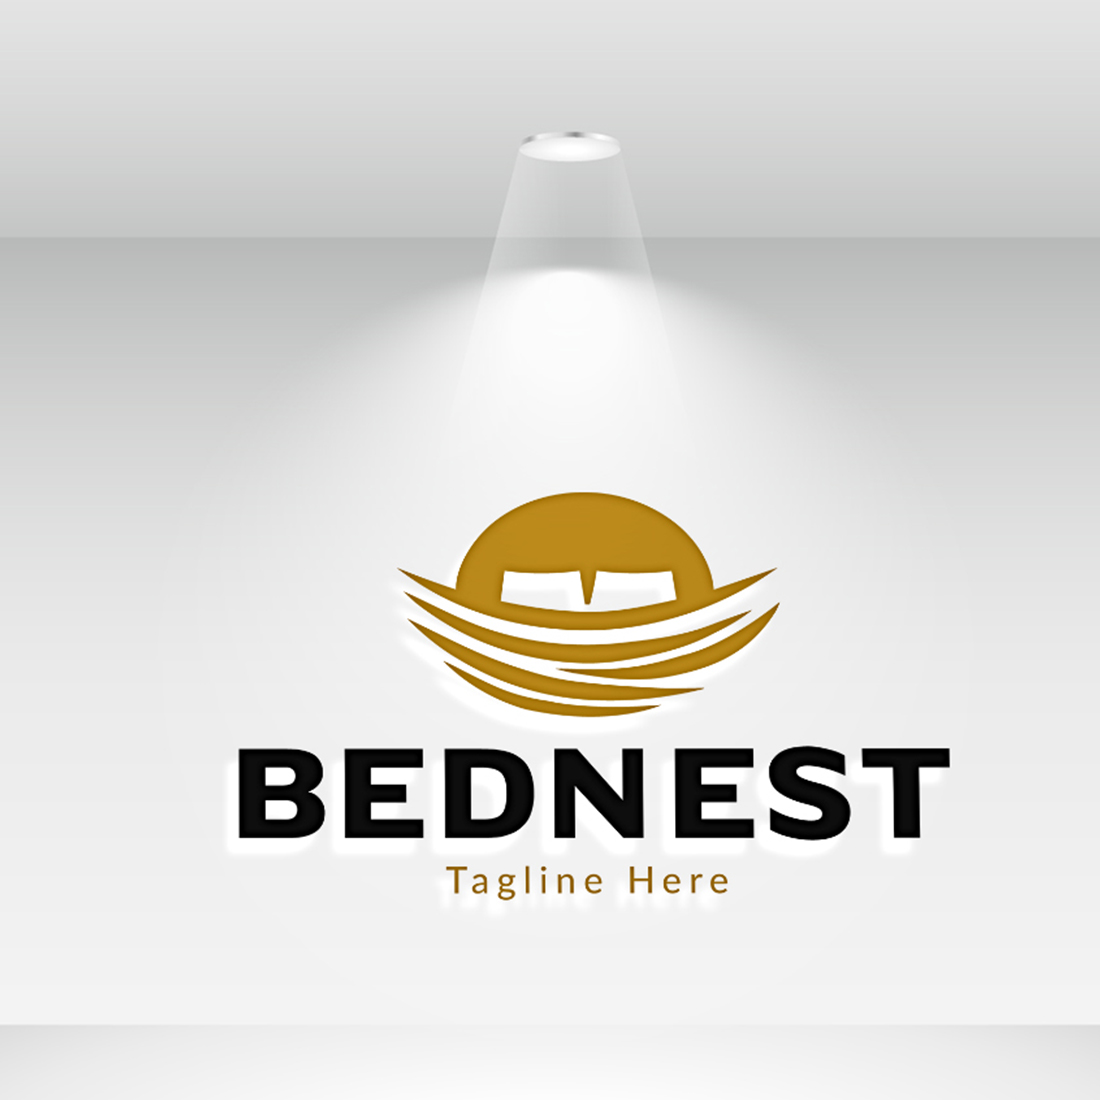 Bed nest logo on a white wall.